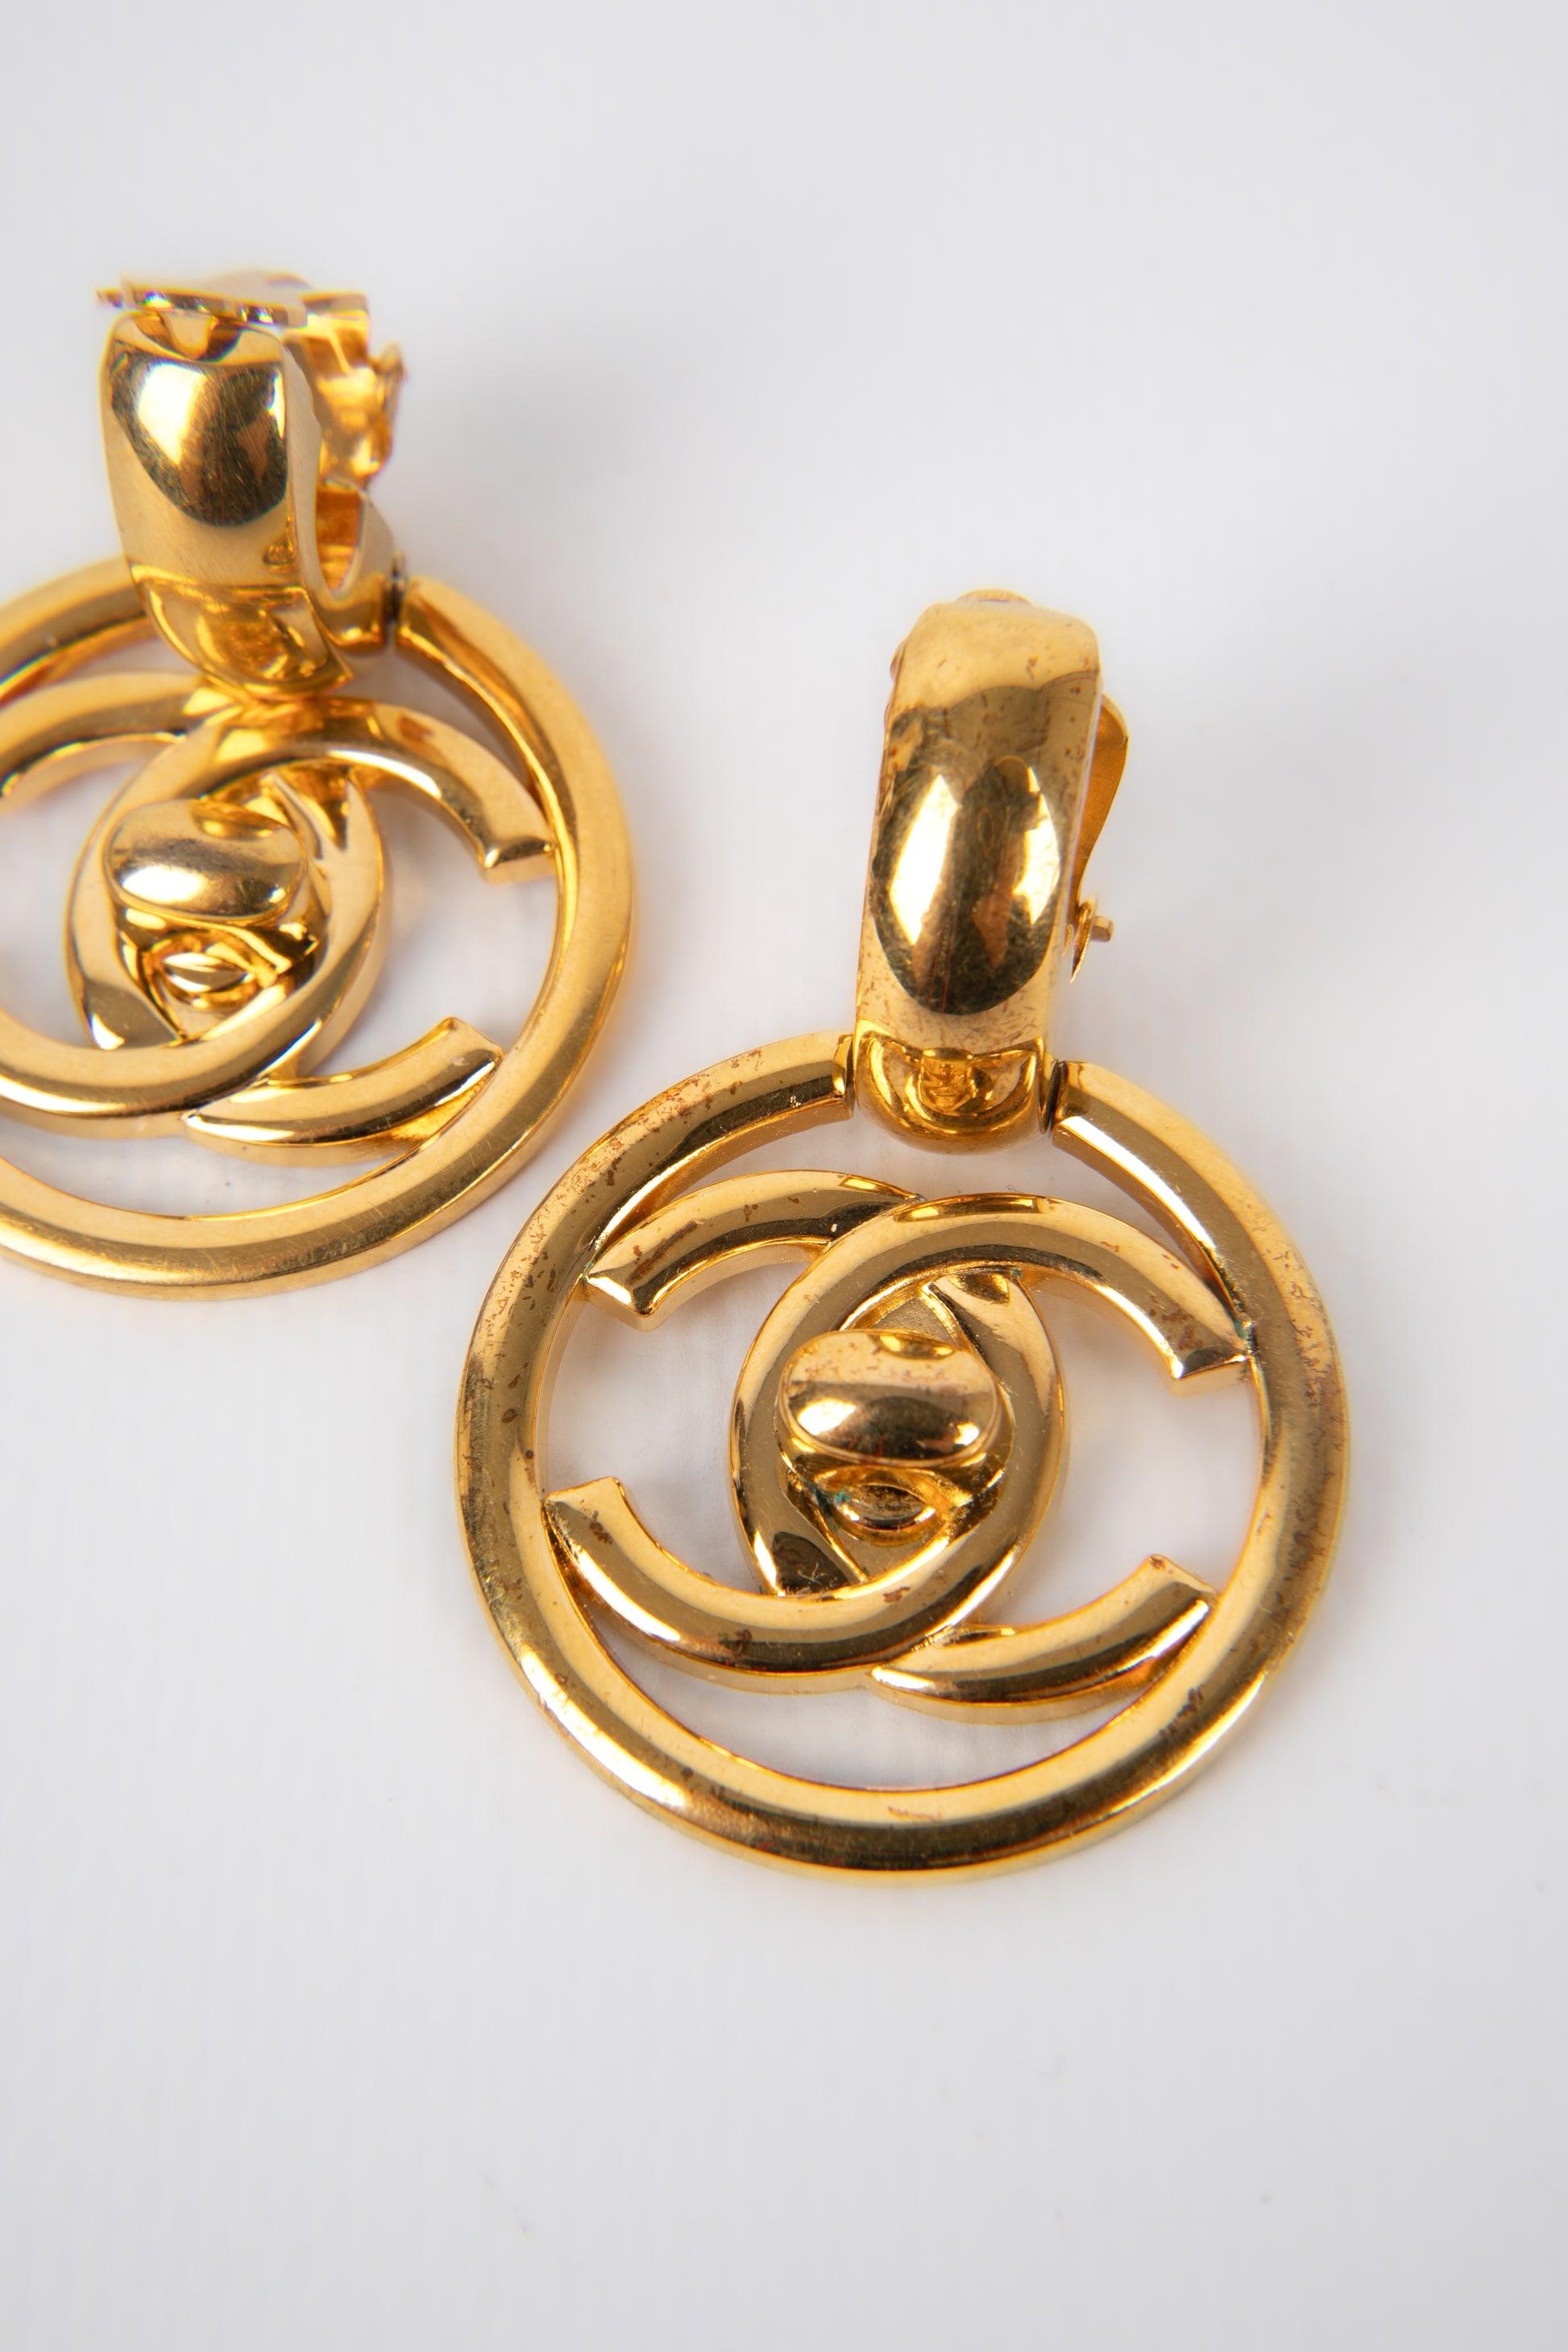 Chanel- (Made in France) Golden metal turnlock earrings. 1997 Spring-Summer Collection.

Additional information:
Condition: Good condition
Dimensions: Height: 5.2 cm
Period: 20th Century

Seller Reference:CB61
